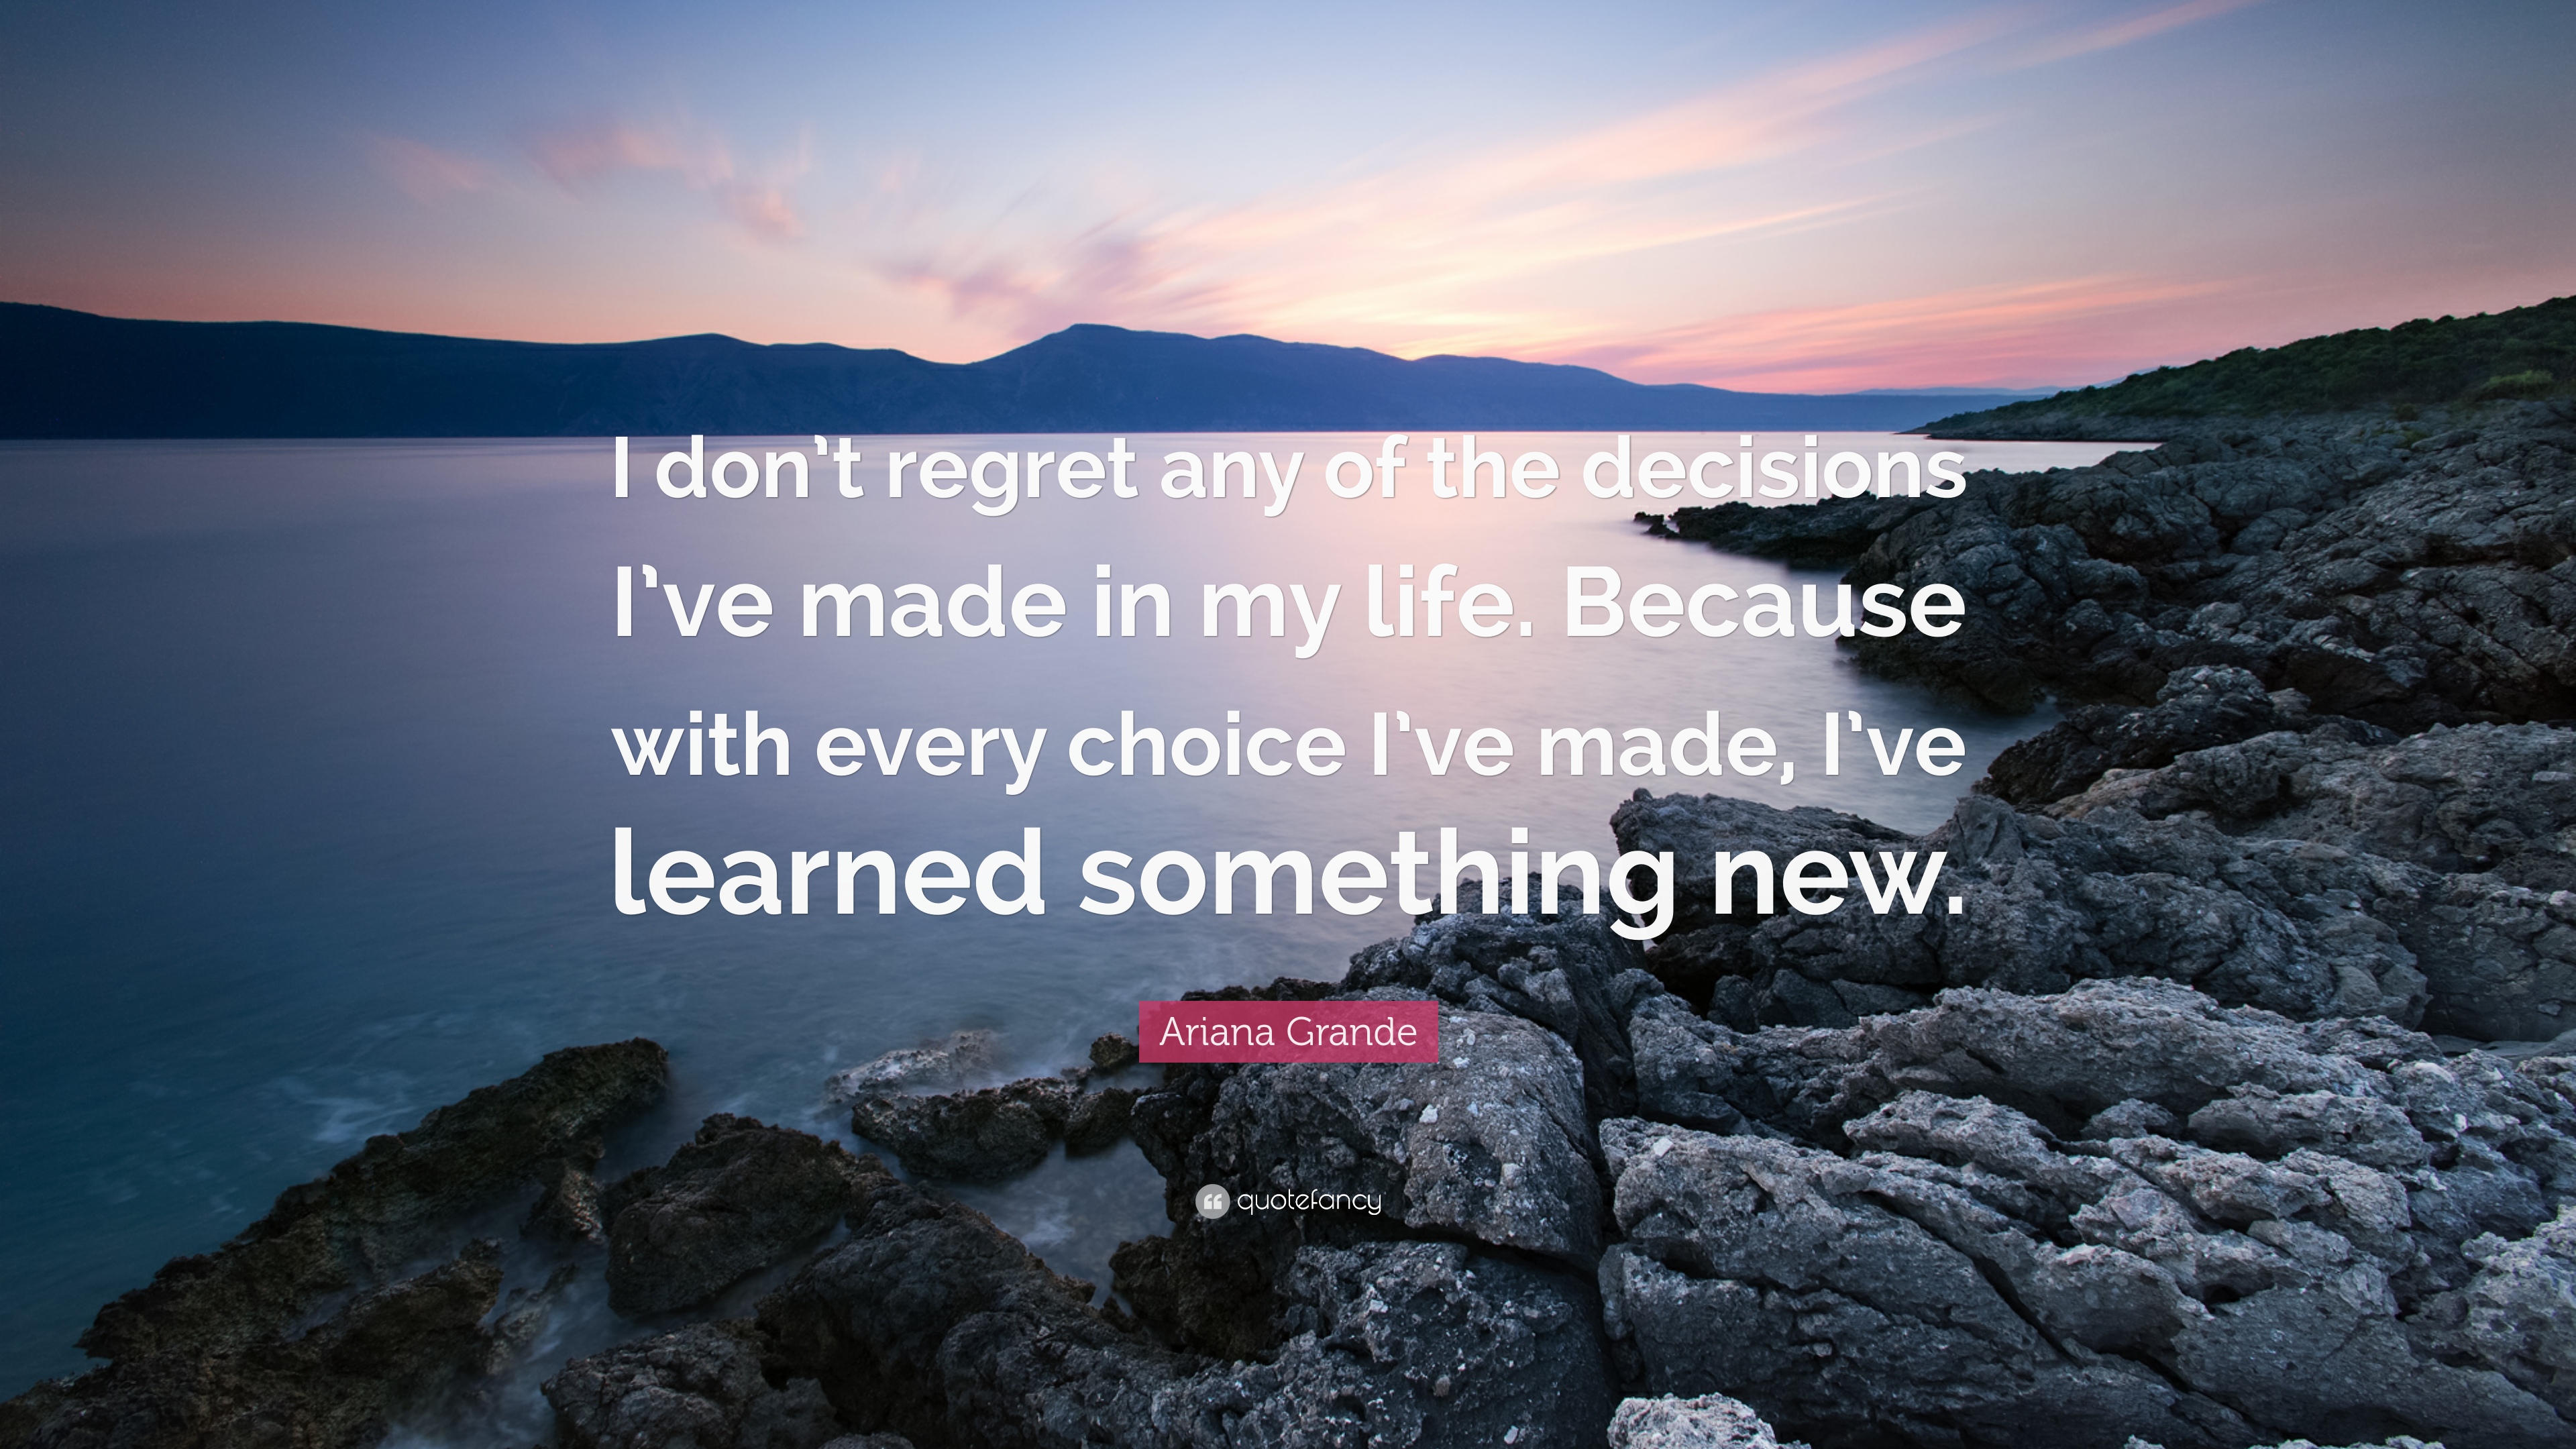 Ariana Grande Quote: “I don't regret any of the decisions I